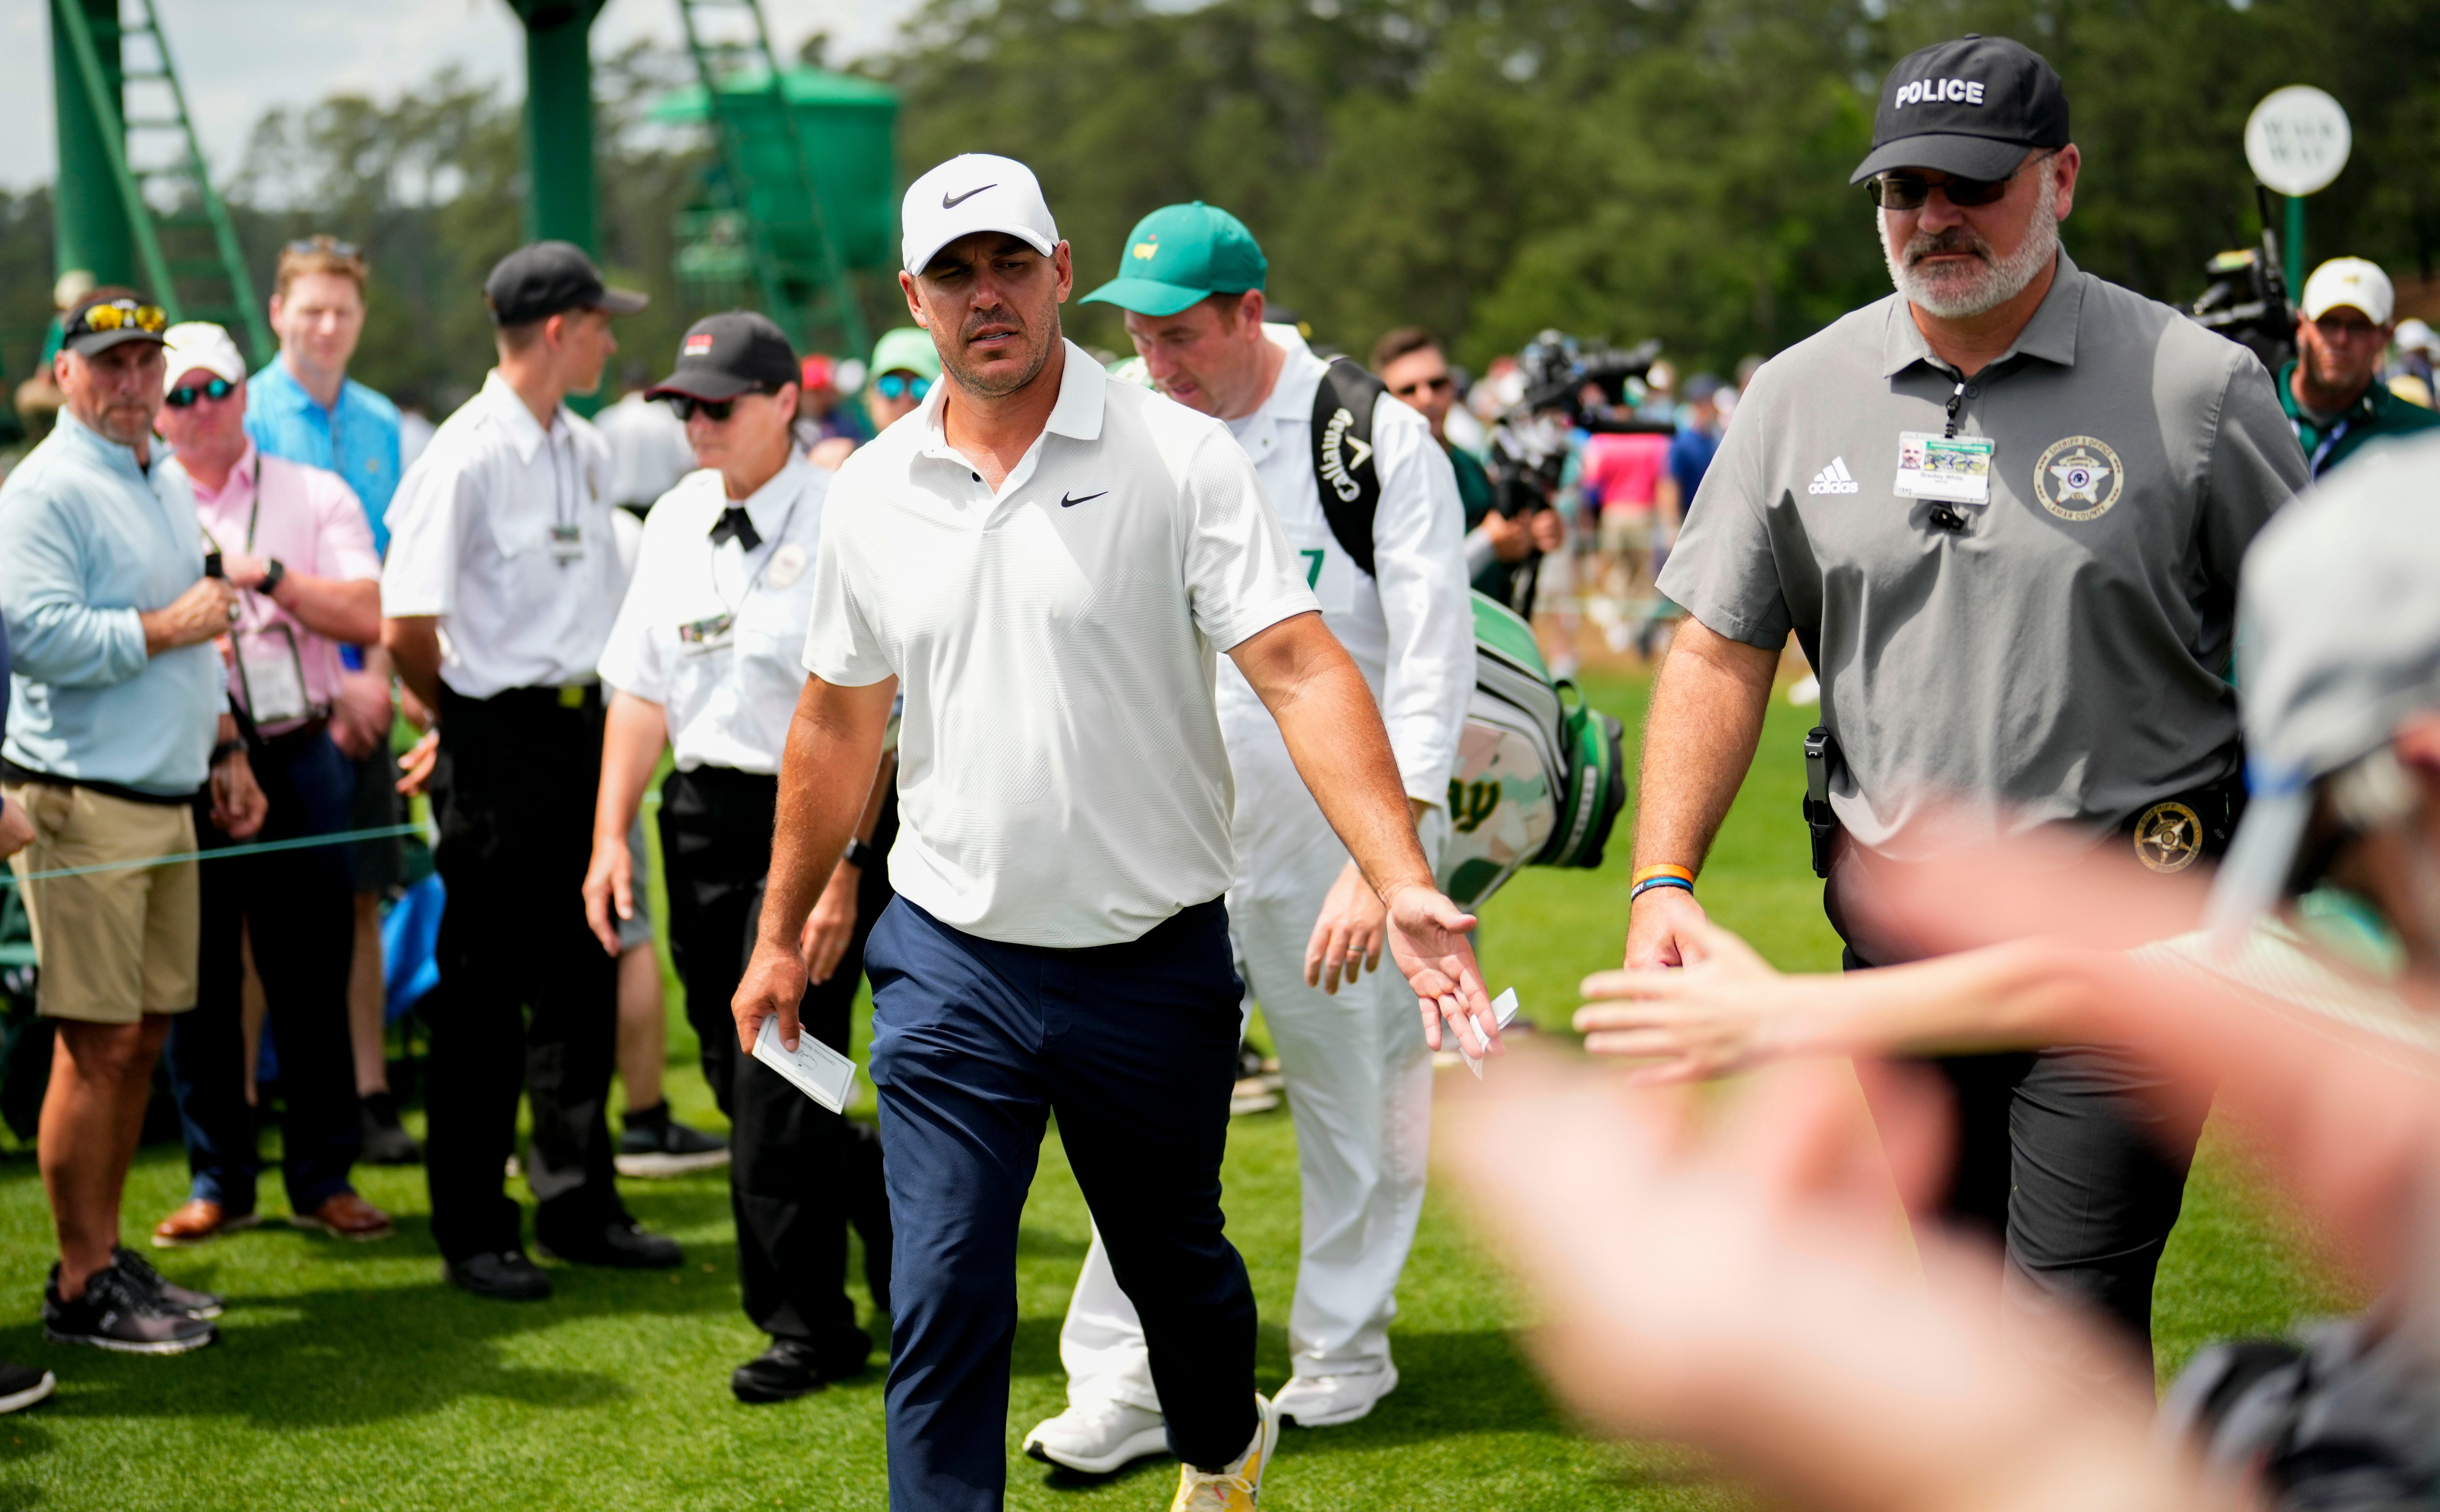 Brooks Koepka greets patrons after finishing his round during the second round of The Masters golf tournament at the Augusta National Golf Club in Augusta, Ga., on April 7, 2023.